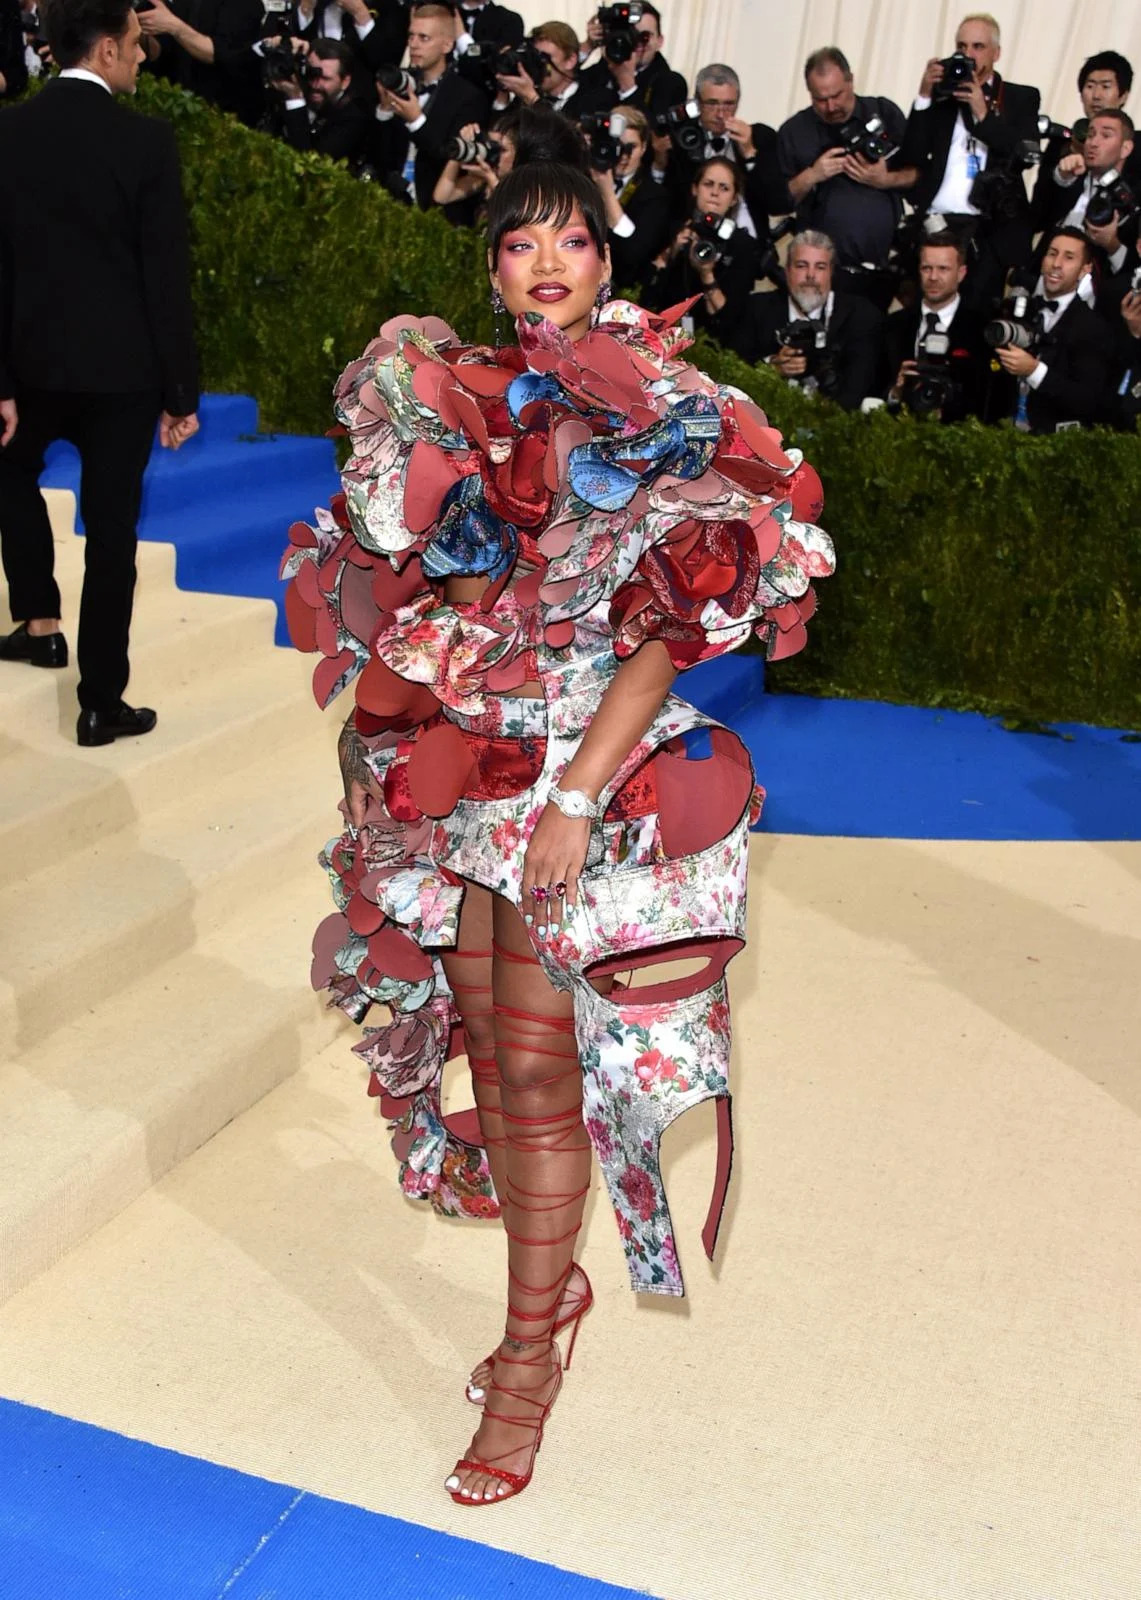 PHOTO: Rihanna attends 'Rei Kawakubo/Comme des Garcons: Art Of The In-Between' Costume Institute Gala at Metropolitan Museum of Art on May 1, 2017 in New York City.  (John Shearer/Getty Images)